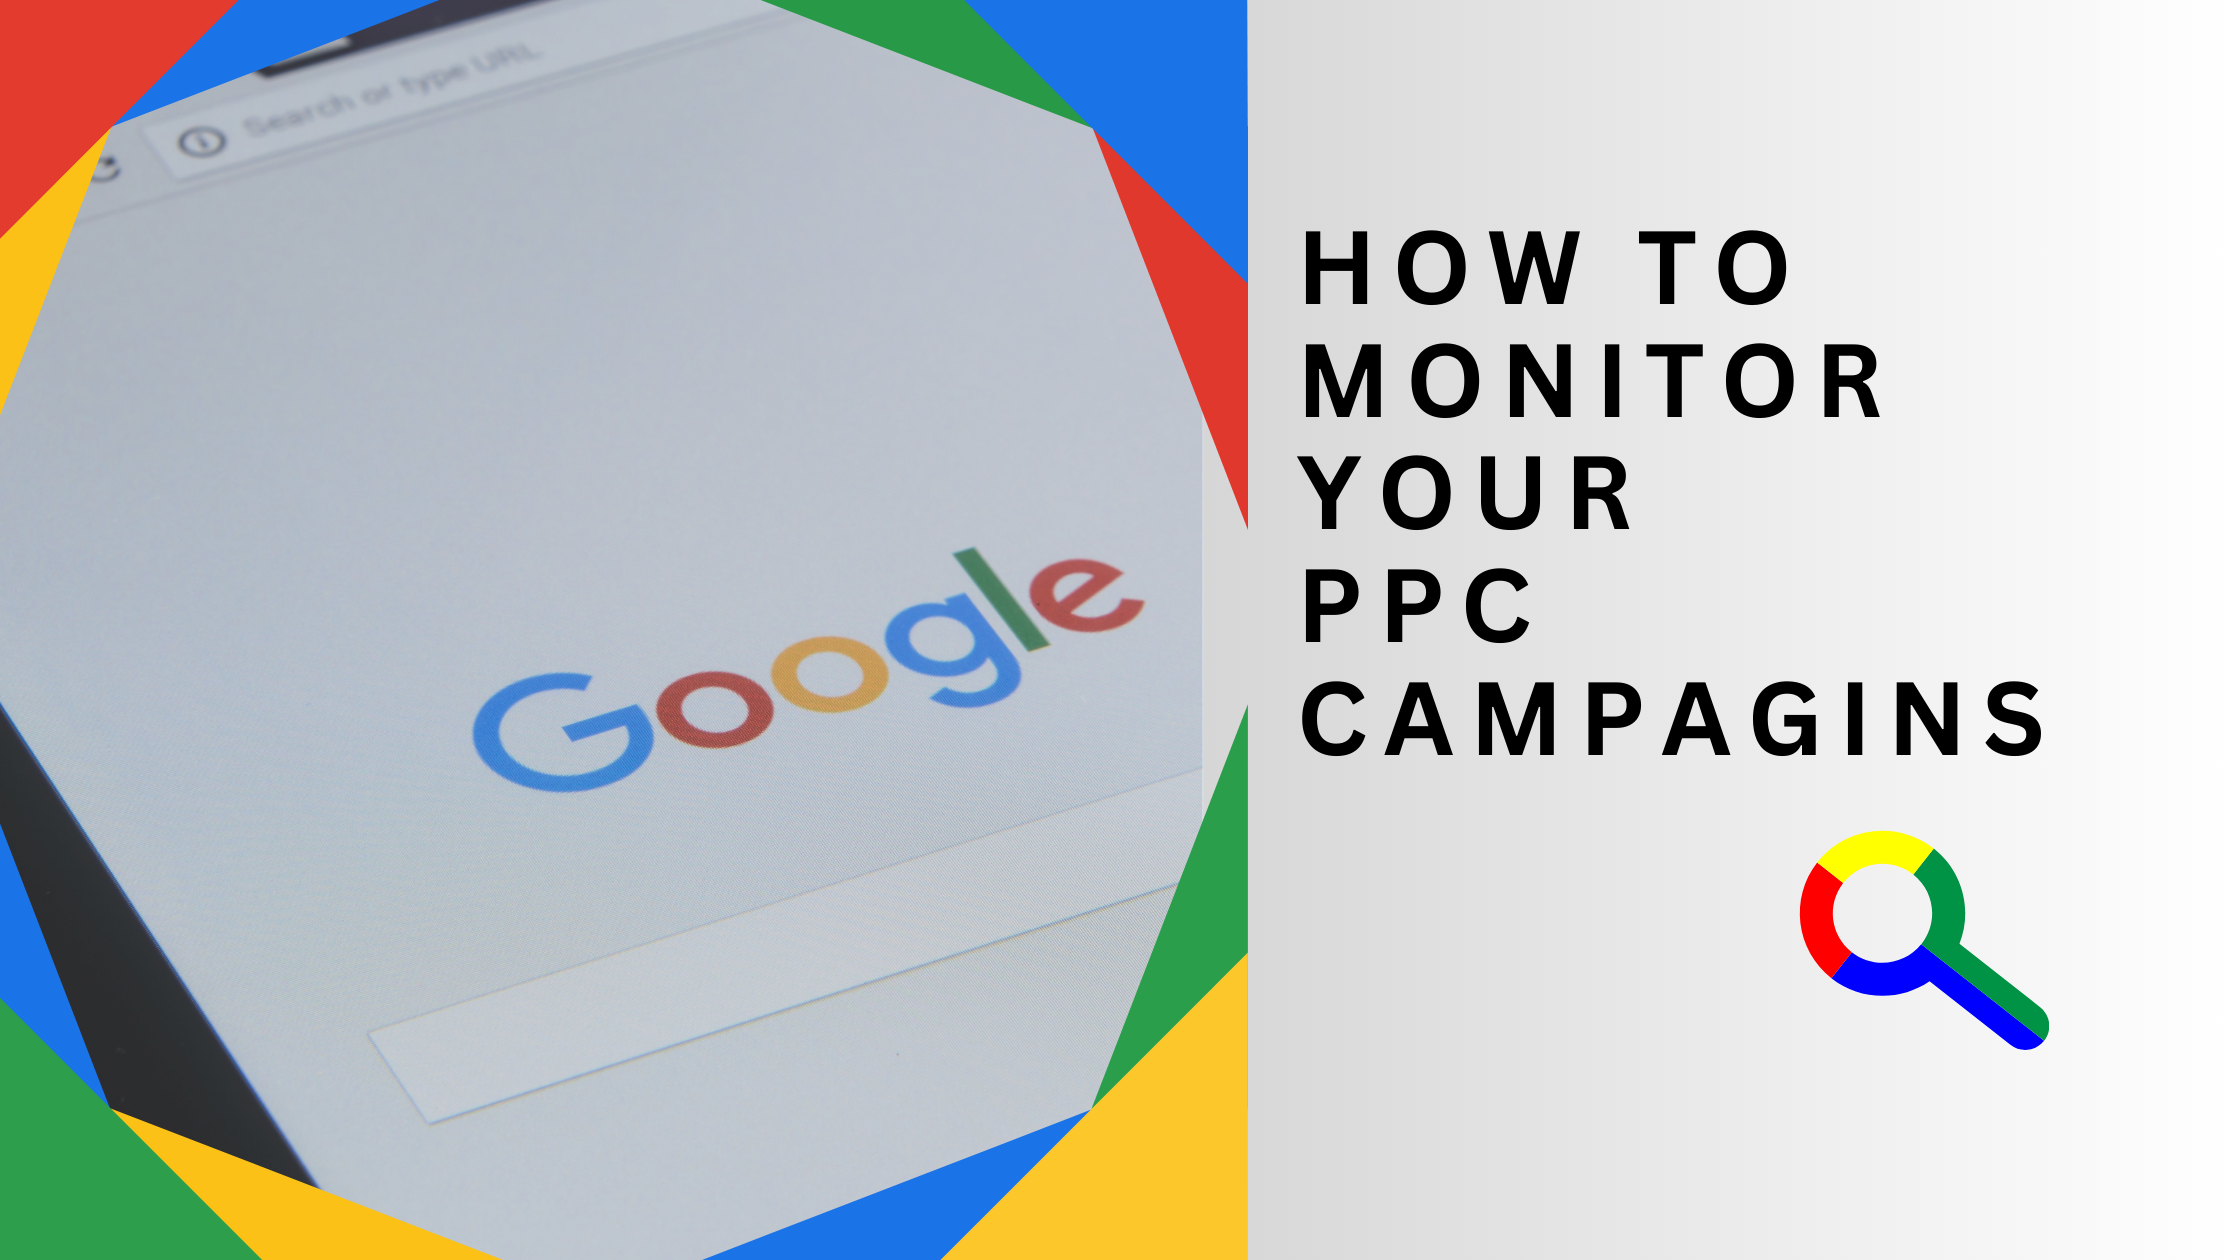 Essential Metrics to improve your Google Campaigns